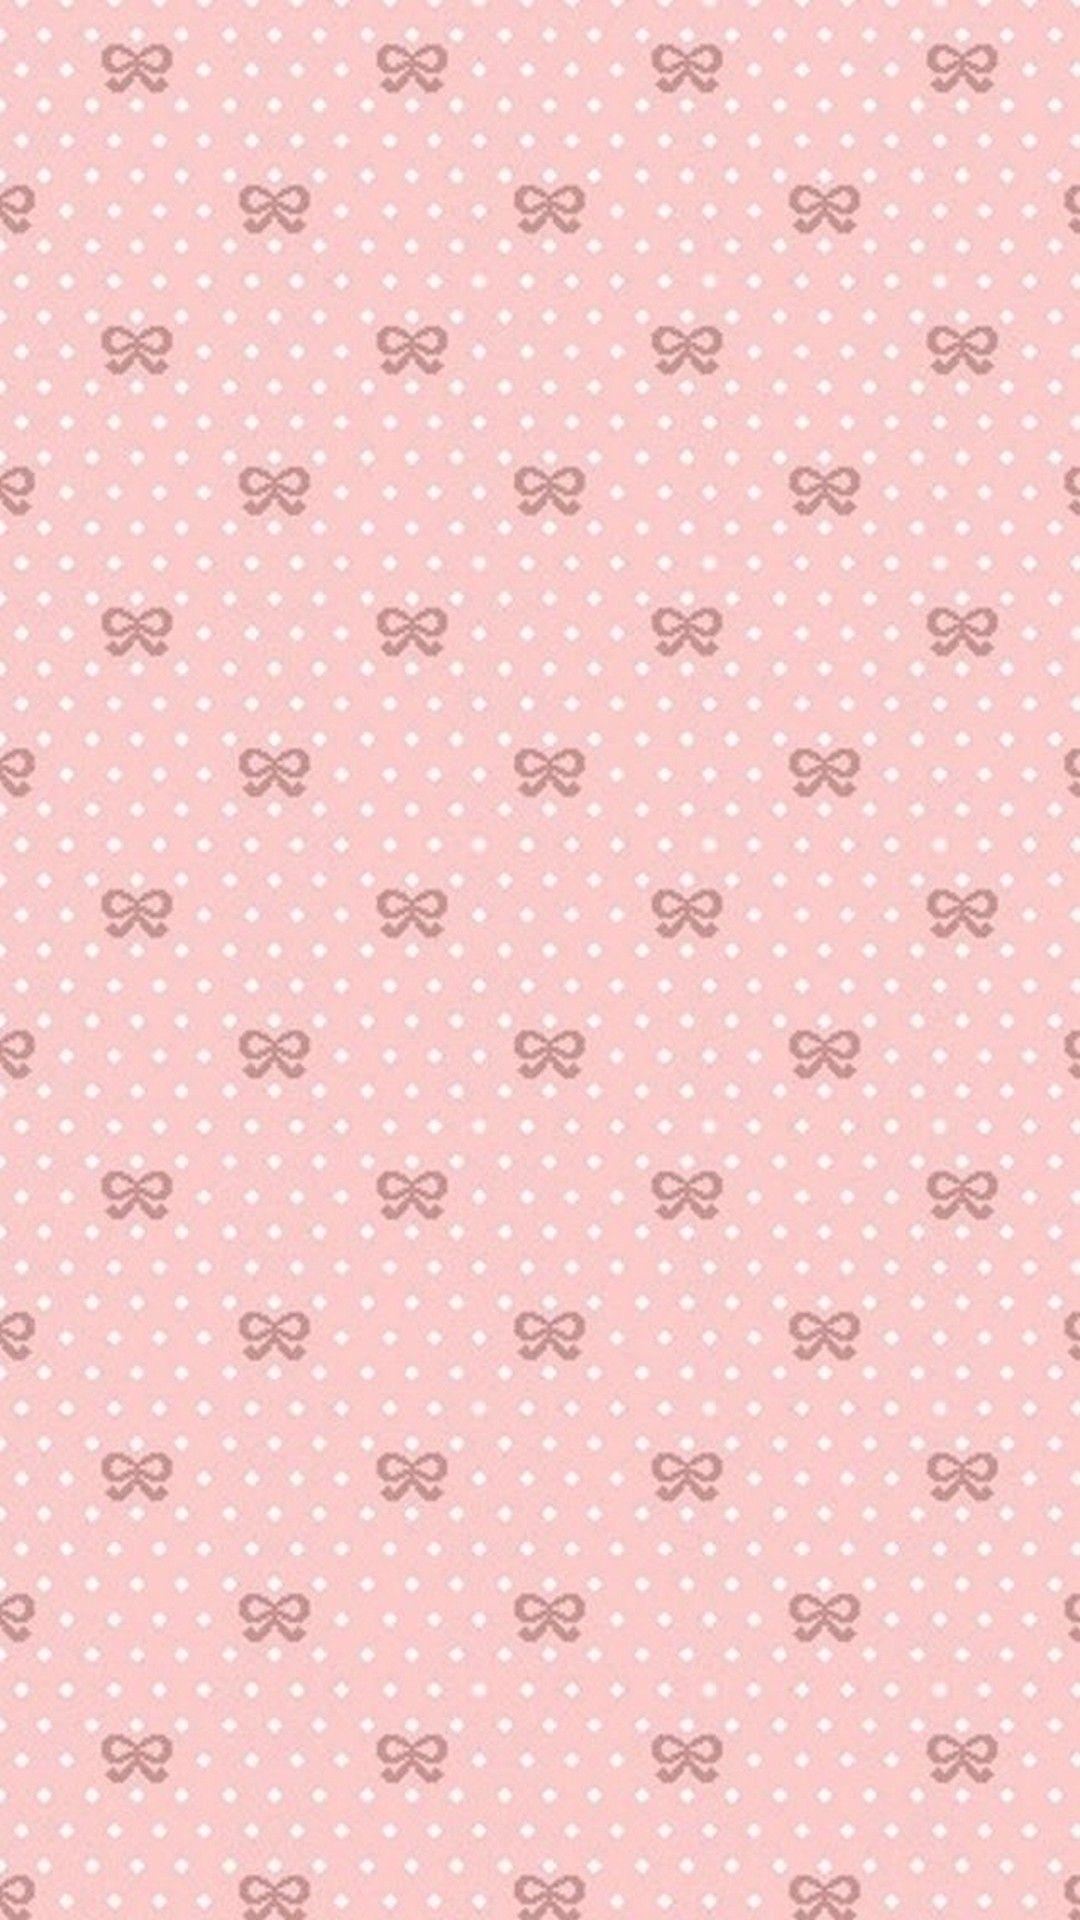 Pink Wallpaper Cute Girly For Android Cute Wallpaper